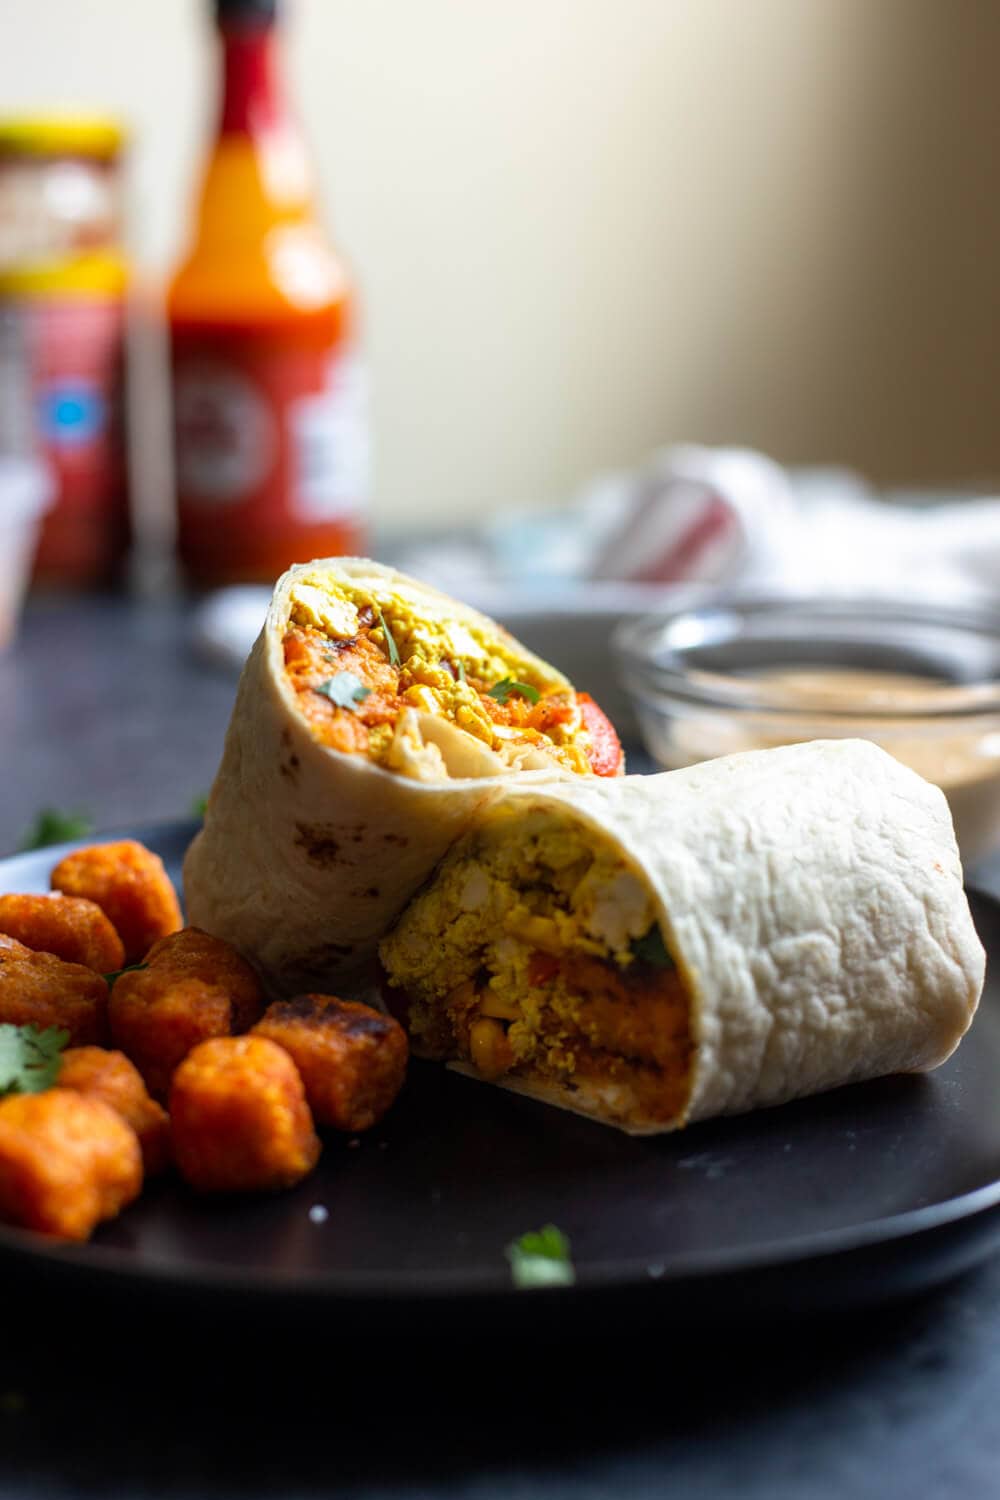 a sliced vegan breakfast burrito on a plate with tater tots on the side